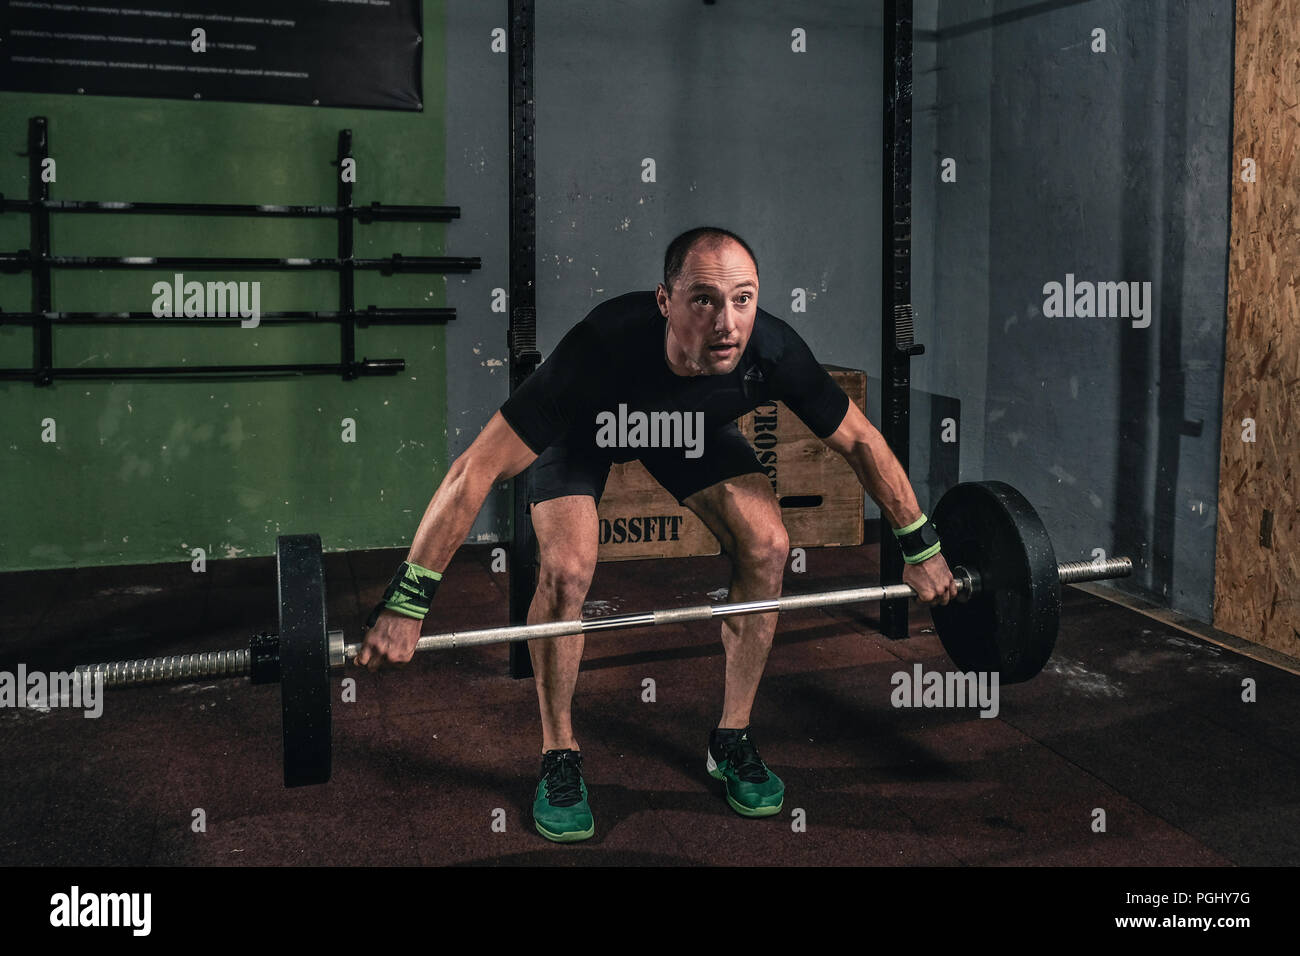 Young man at a crossfit gym lifting a barbell. Stock Photo